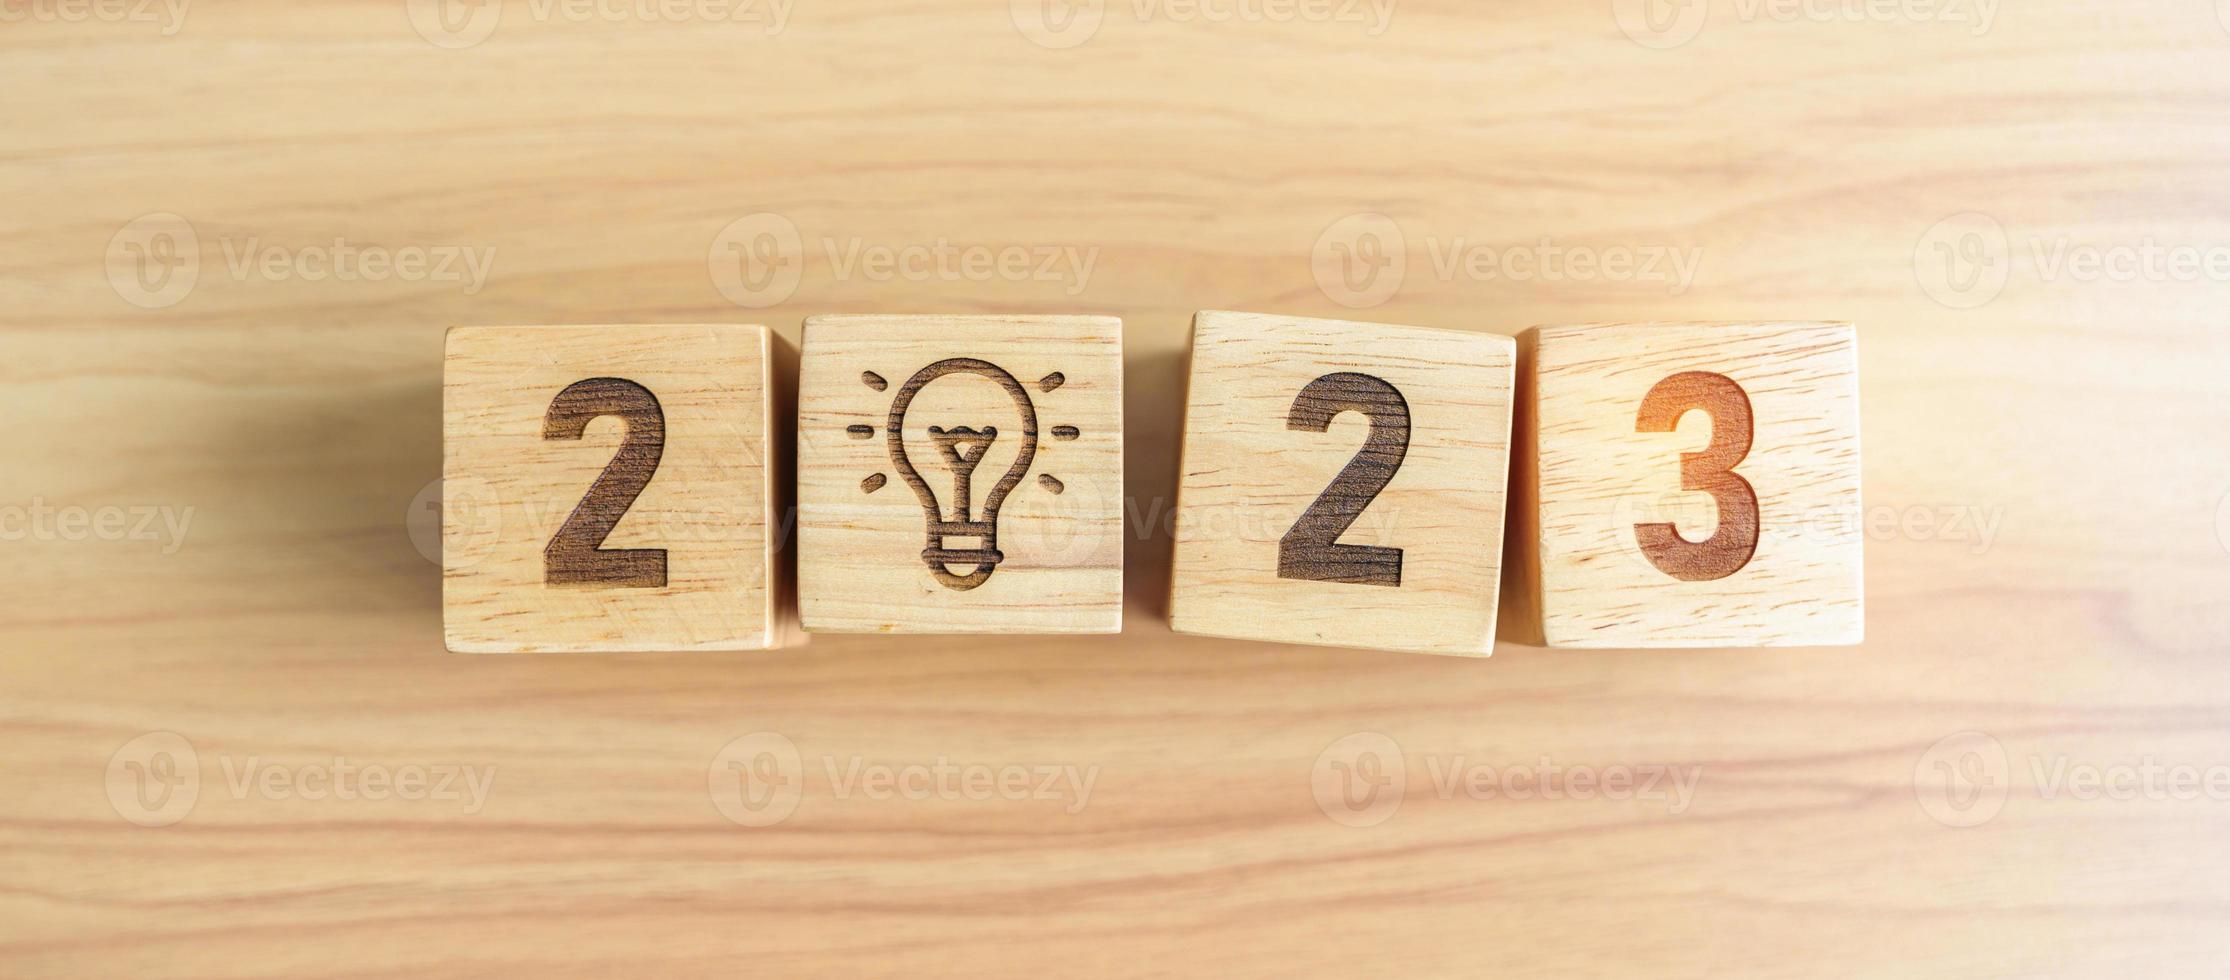 2023 block with lightbulb icon. Business Idea, Creative, Thinking, brainstorm, Goal, Resolution, strategy, plan, Action, change and New Year start concepts photo